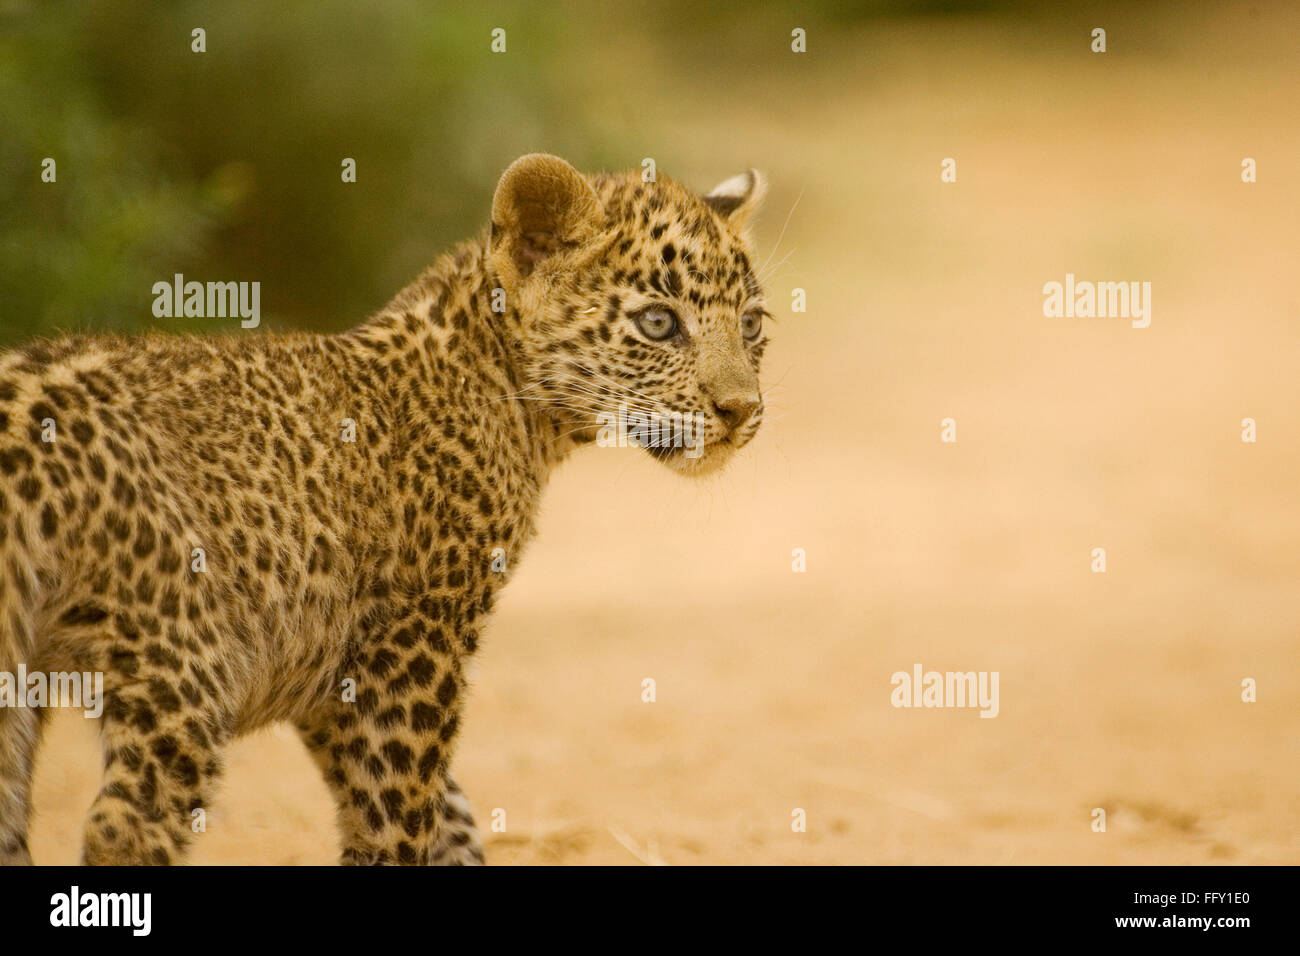 Big cat baby or young Leopard cub Panthera pardus , Ranthambore National Park , Rajasthan , India Stock Photo